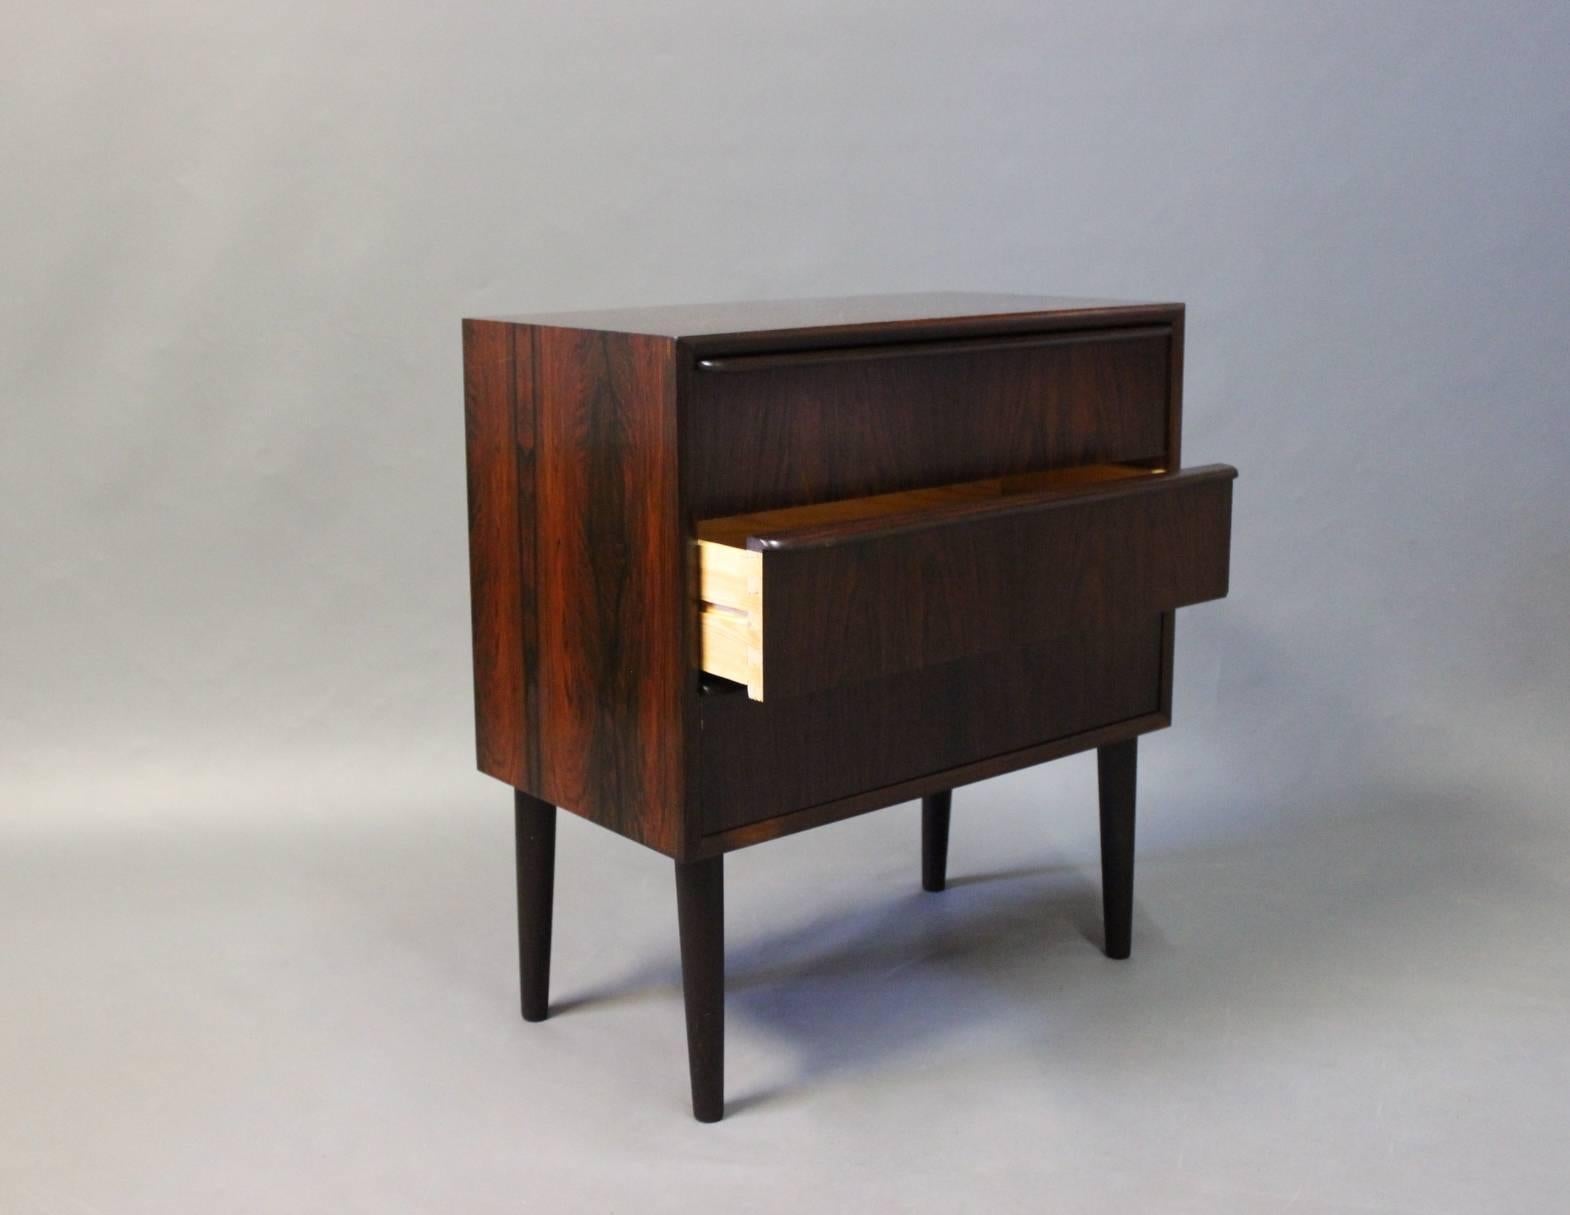 Scandinavian Modern Small Chest of Drawers in Rosewood of Danish Design, 1960s